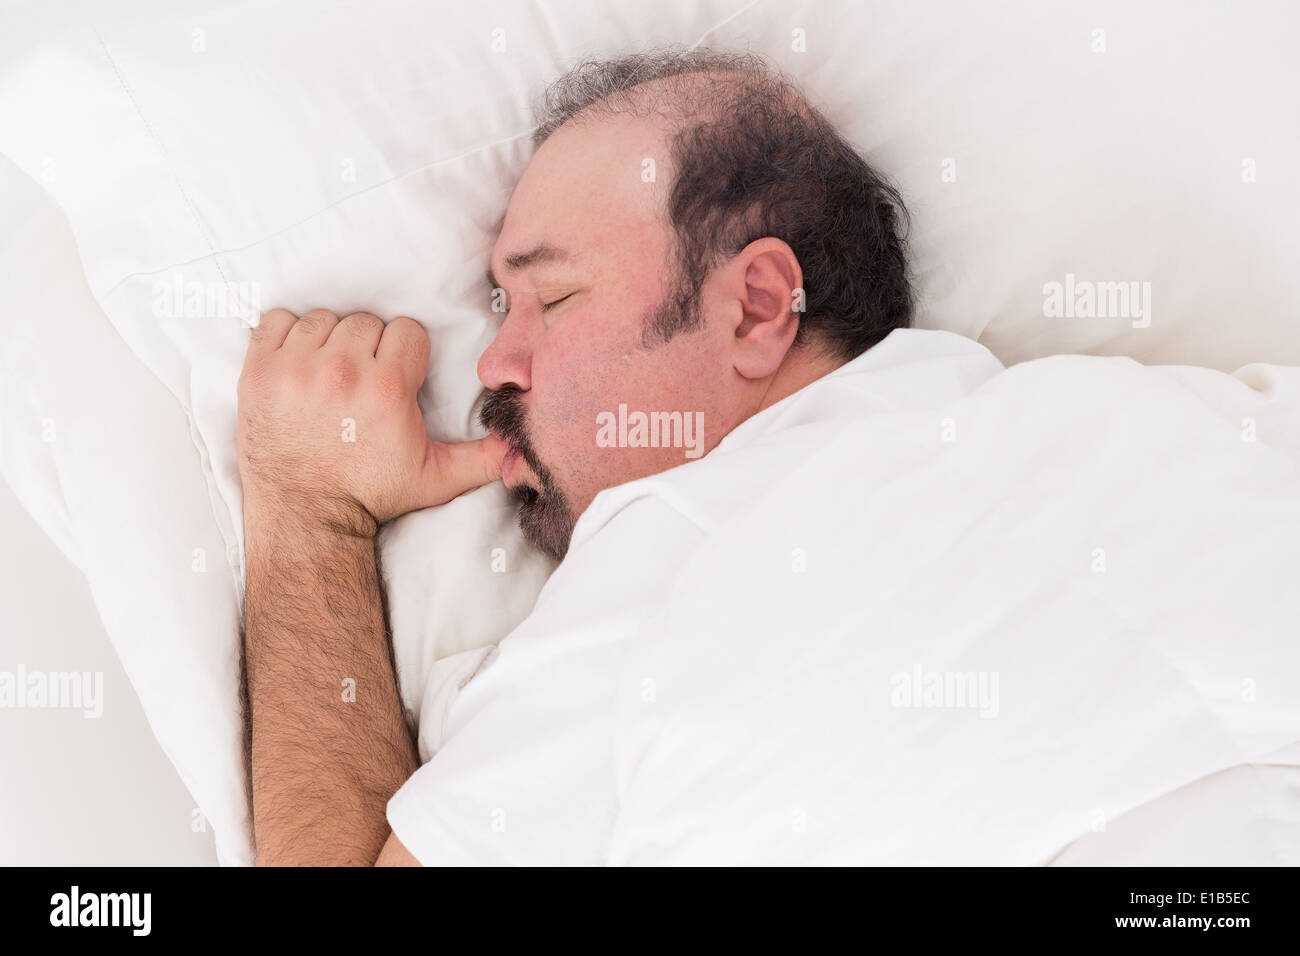 Closeup of a bearded man snuggling into his pillow sucking his thumb like a big baby while sleeping with a serene innocent expre Stock Photo